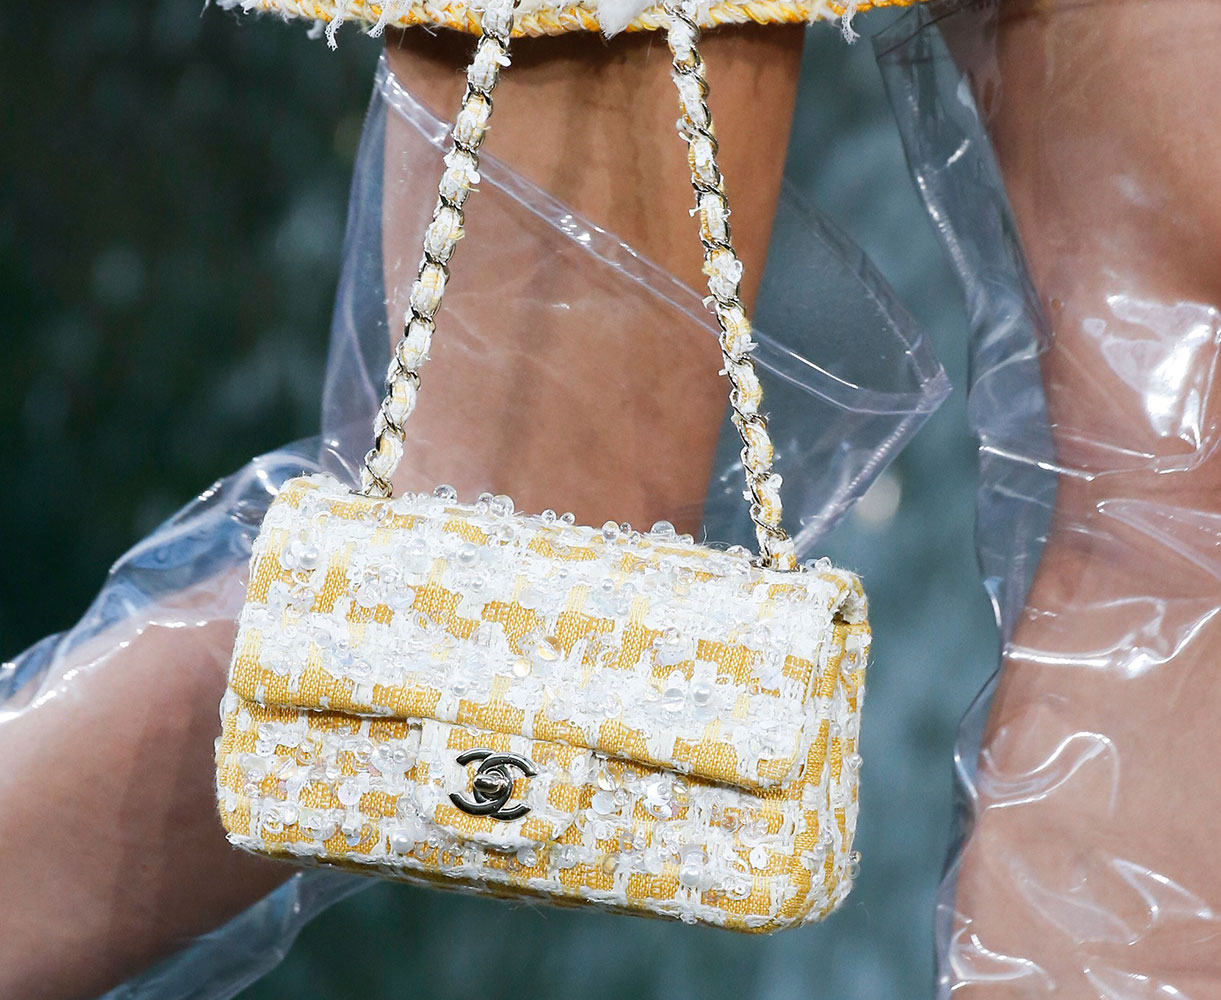 59 Brand New Chanel Bags, Straight From the Brand’s Mermaid Blue Spring 2018 Runway in Paris ...